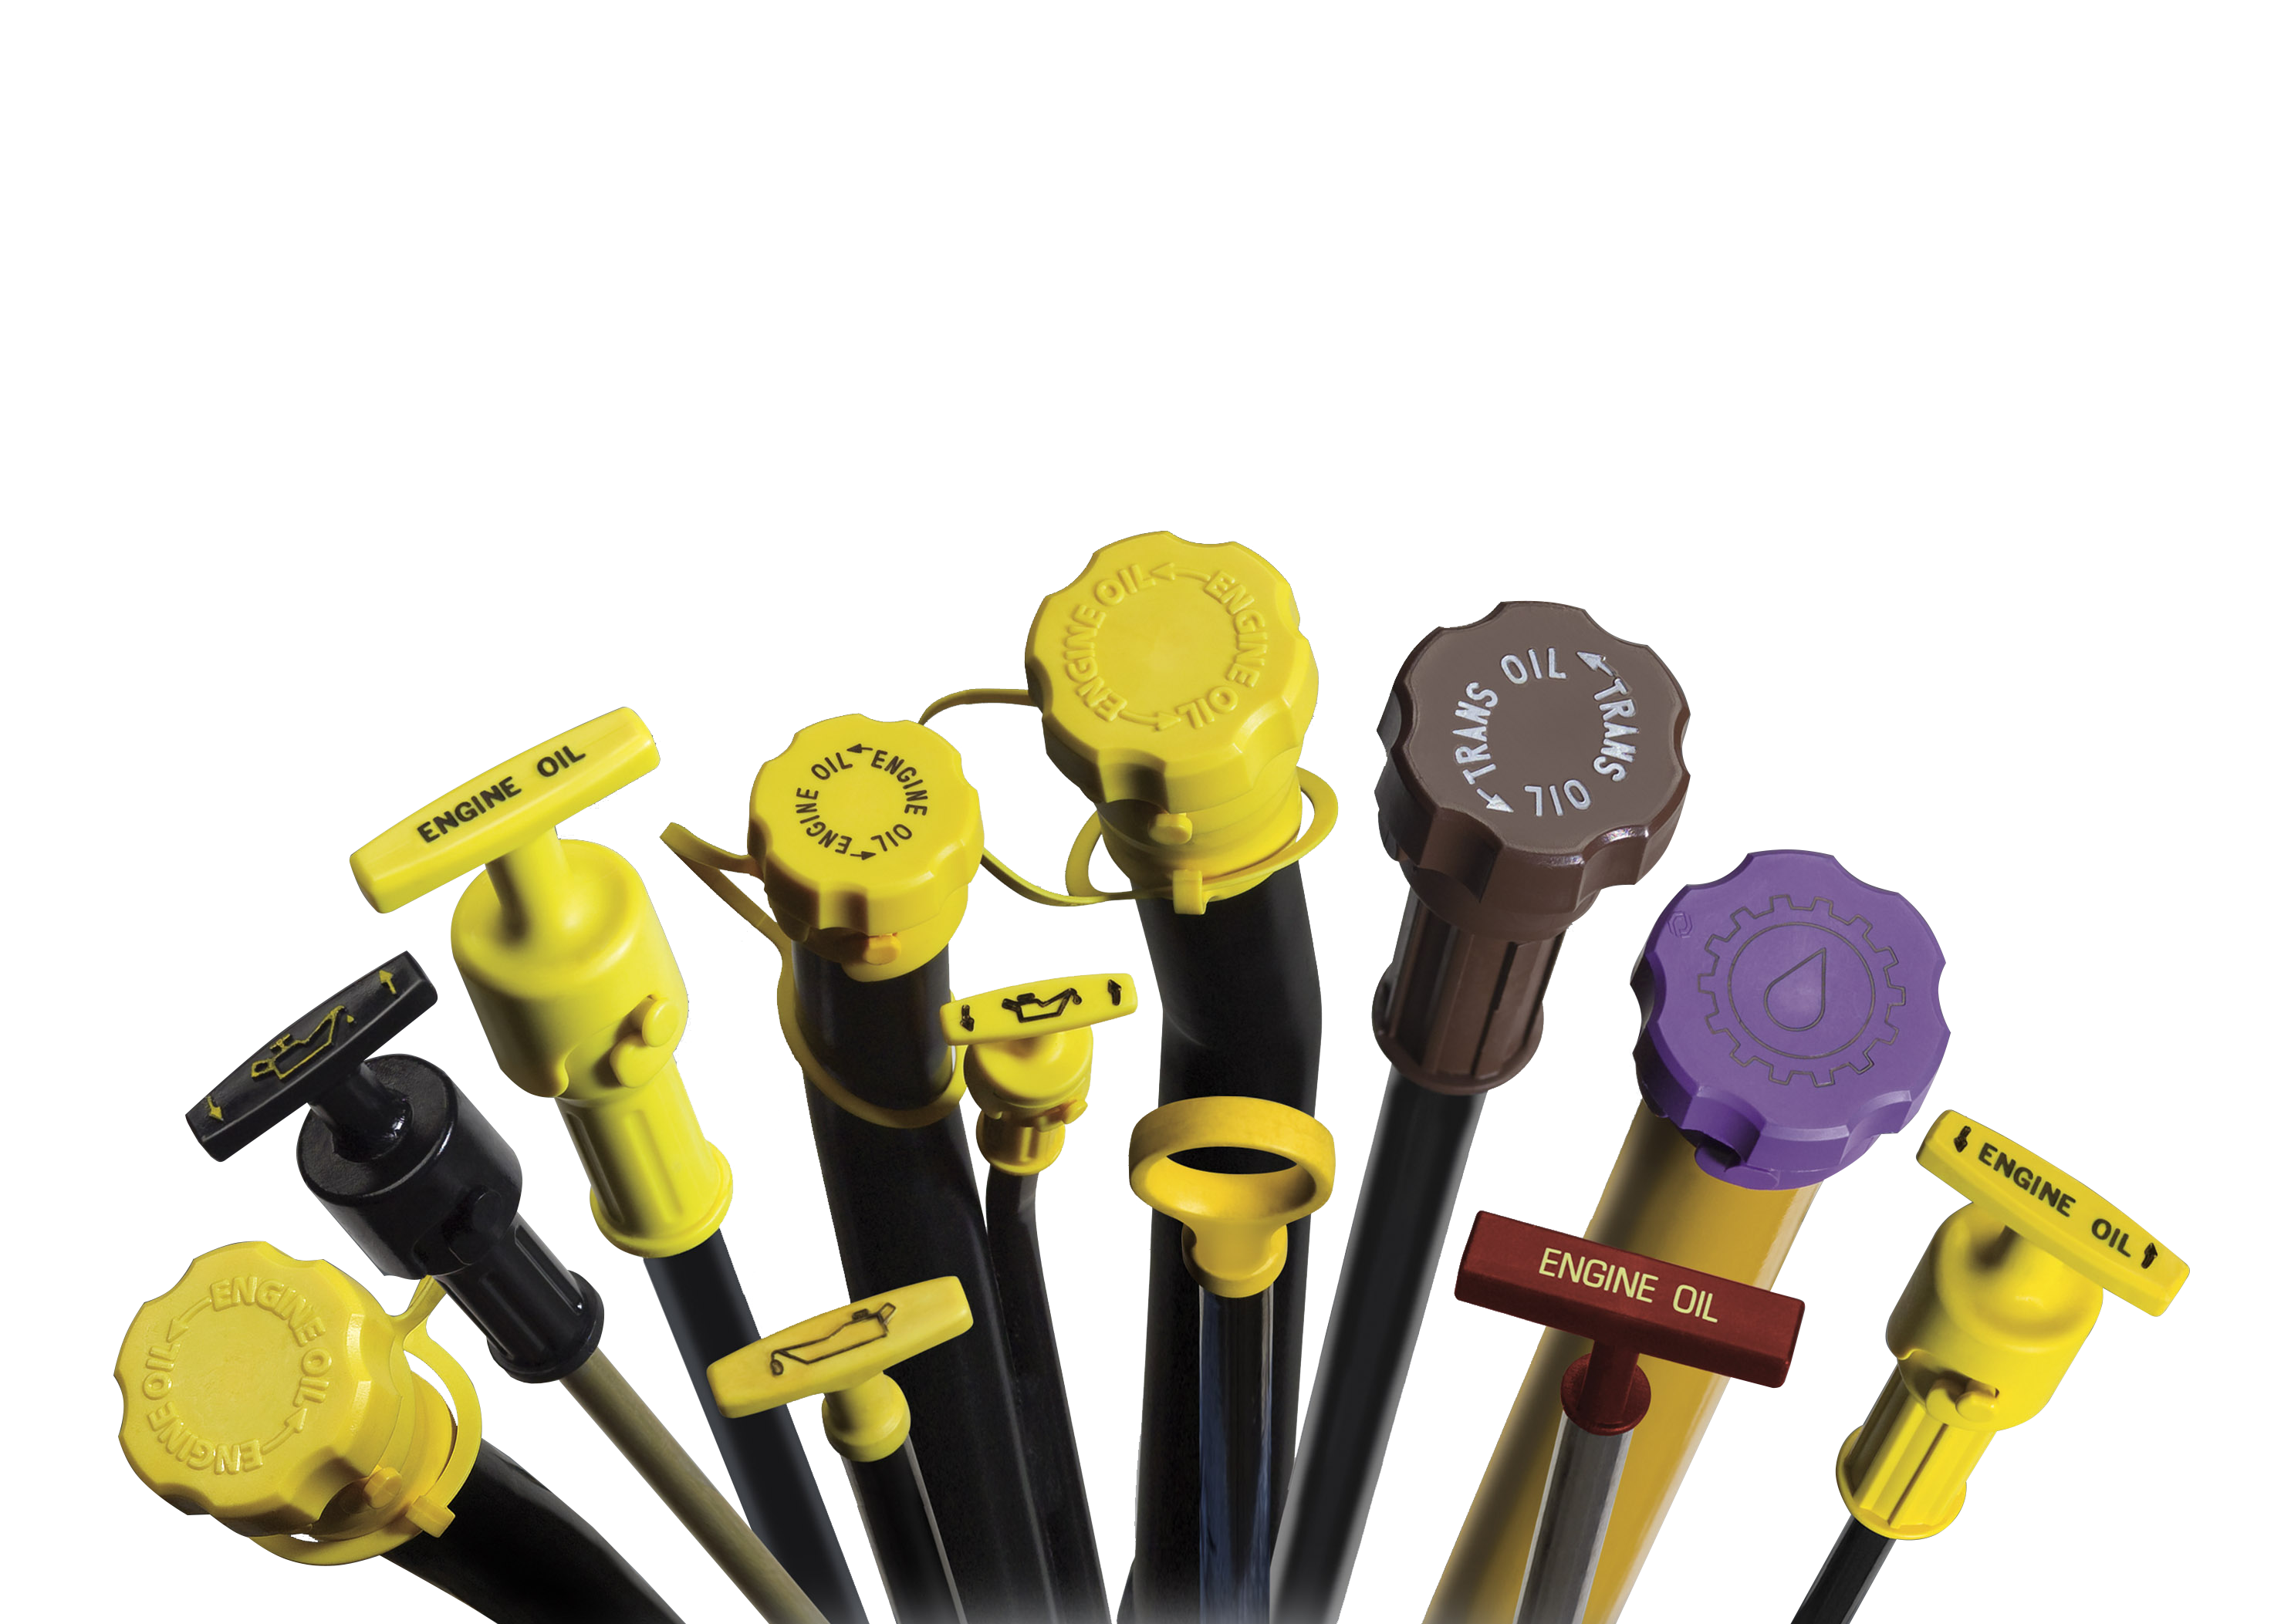 Orscheln Products makes a variety of dipsticks or FLI